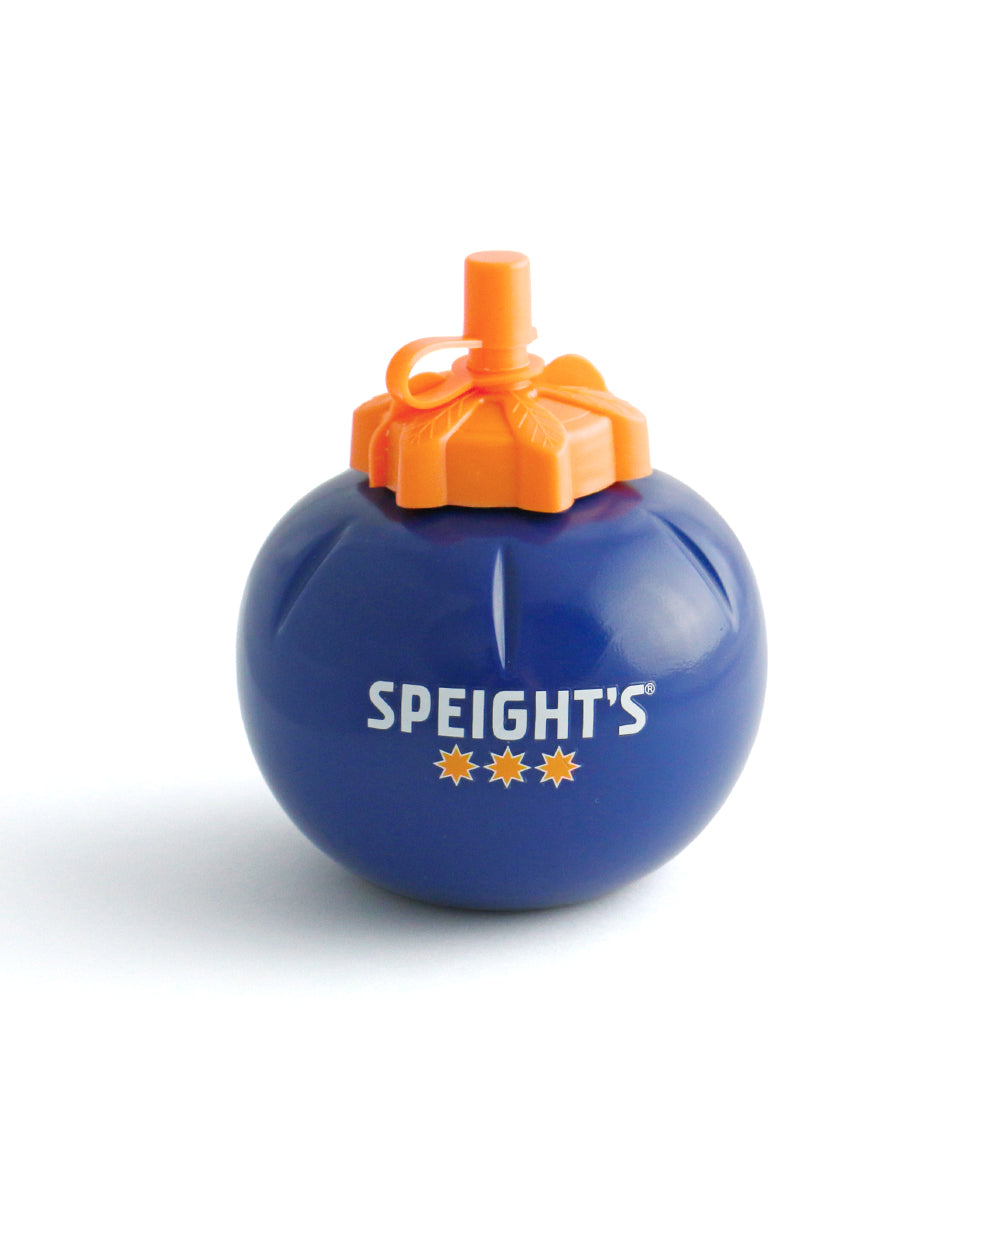 Speight's Sauce Bottle -  Beer Gear Apparel & Merchandise - Speights - Lion Red - VB - Tokyo Dy merch